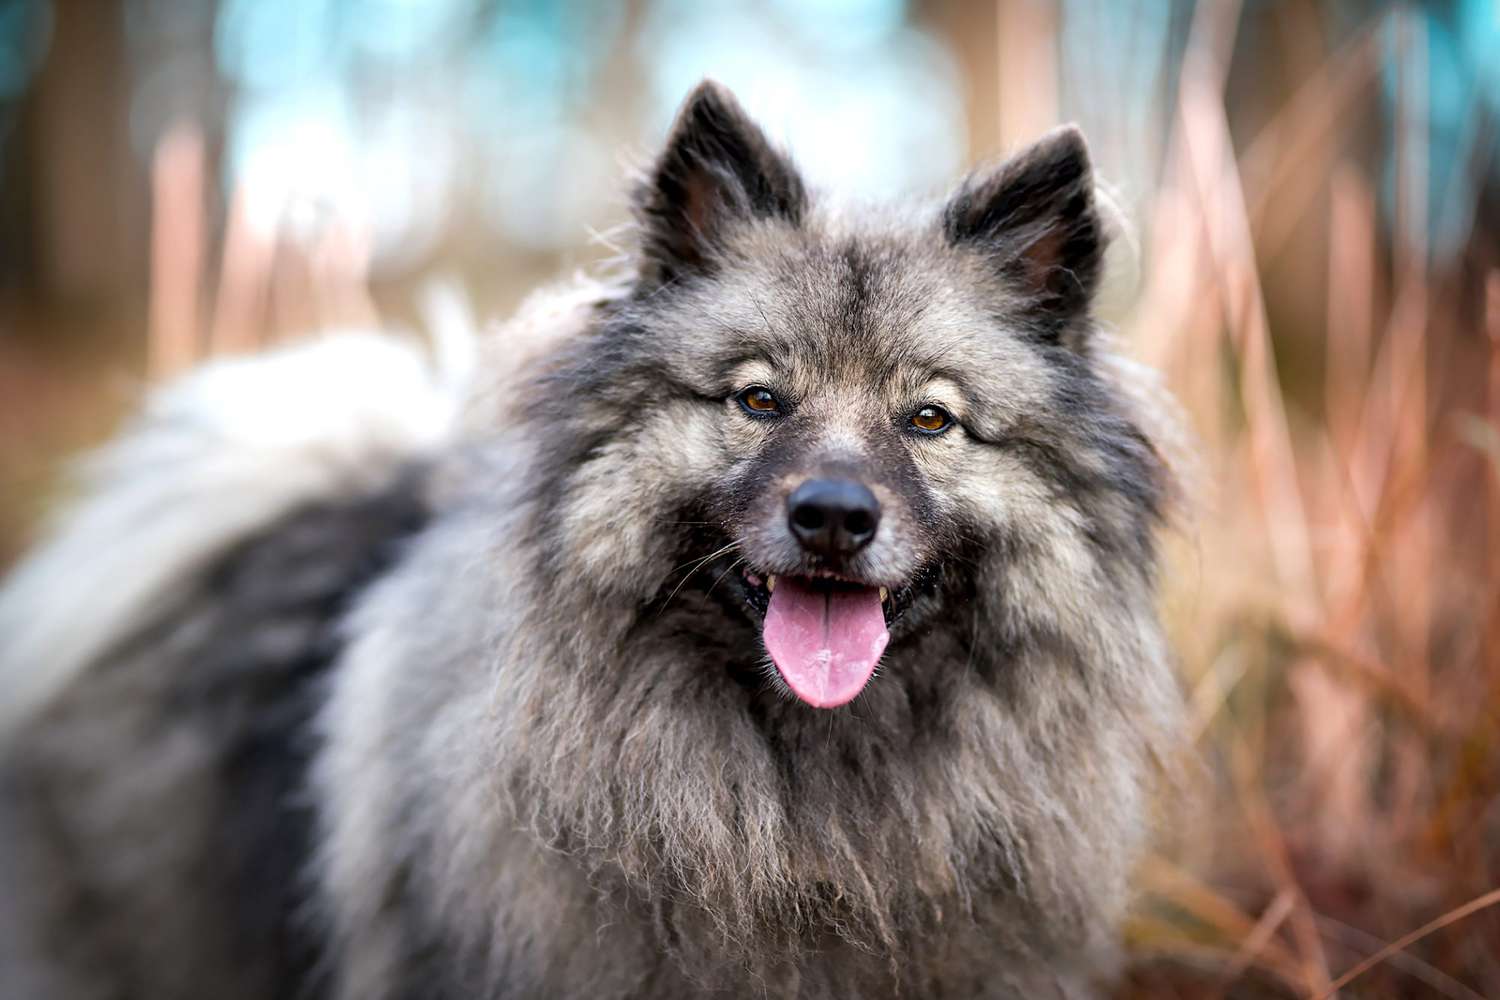 keeshond looking at camera with their tongue out